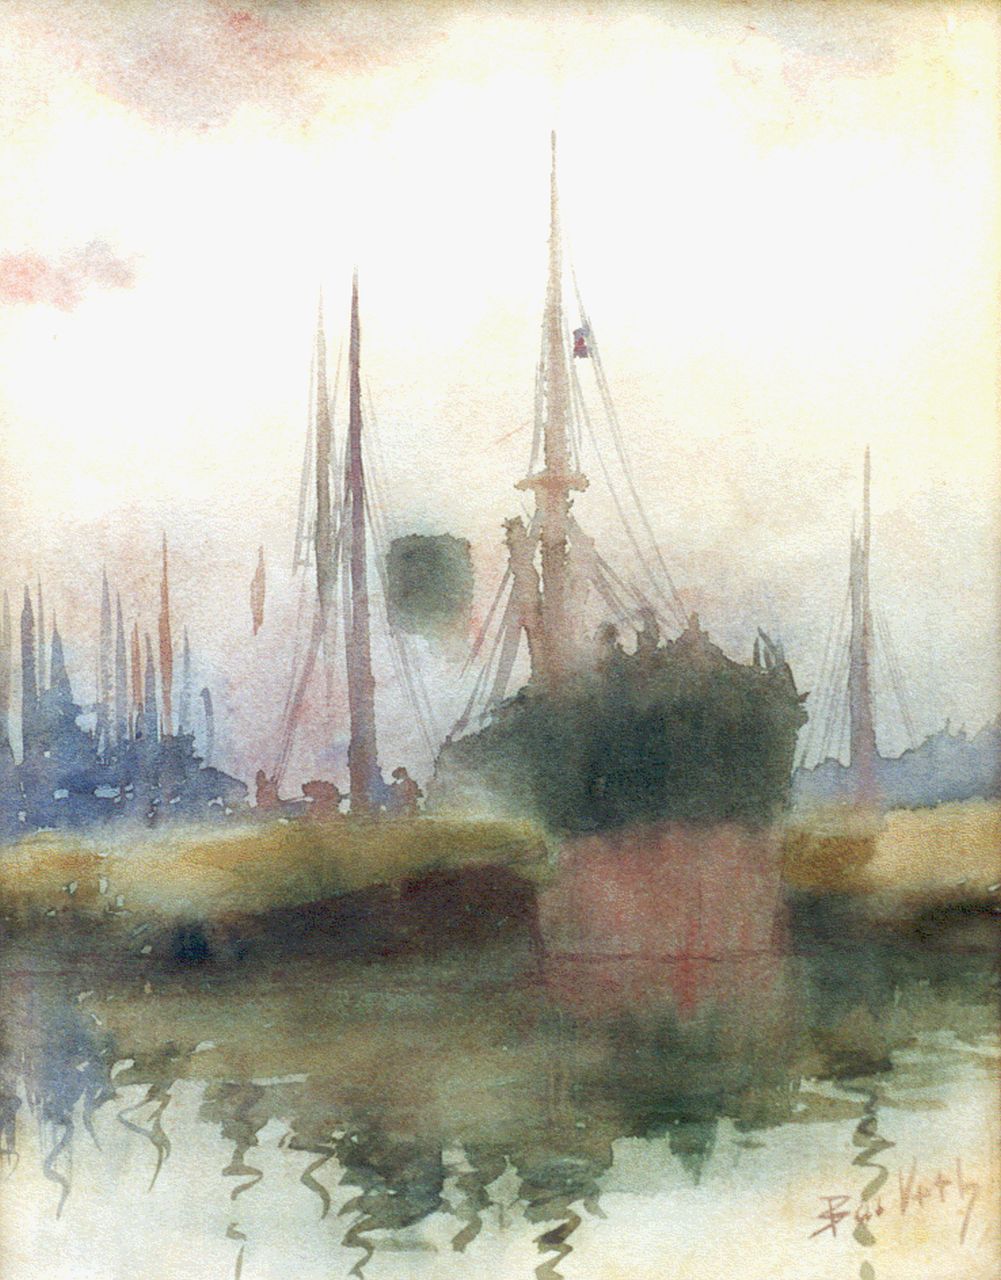 Veth B.  | Bastiaan 'Bas' Veth, A harbour view, watercolour on paper 36.0 x 28.0 cm, signed l.r. and dated on the reverse '91